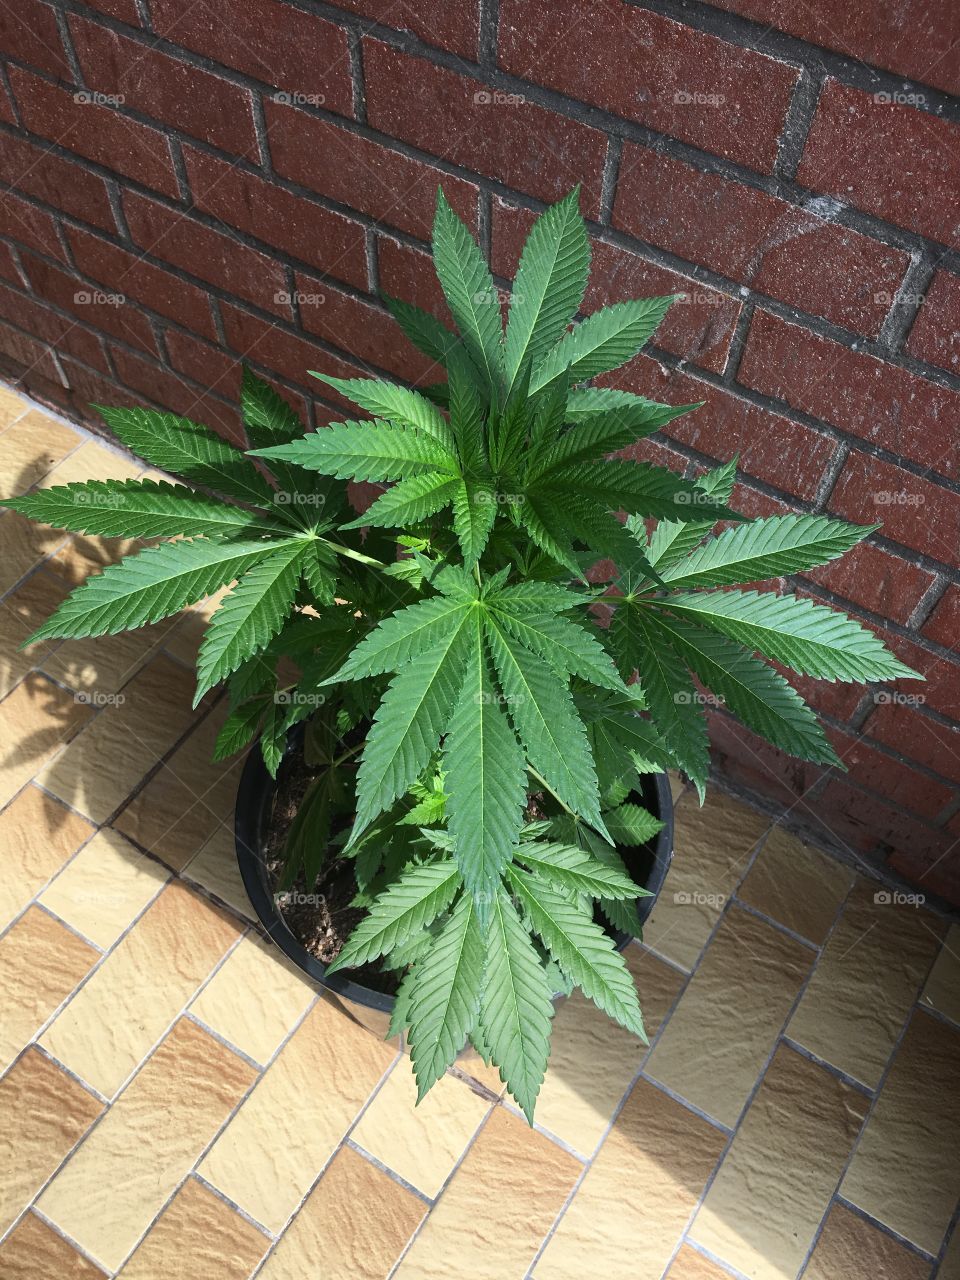 Legal weed plant in Brugge